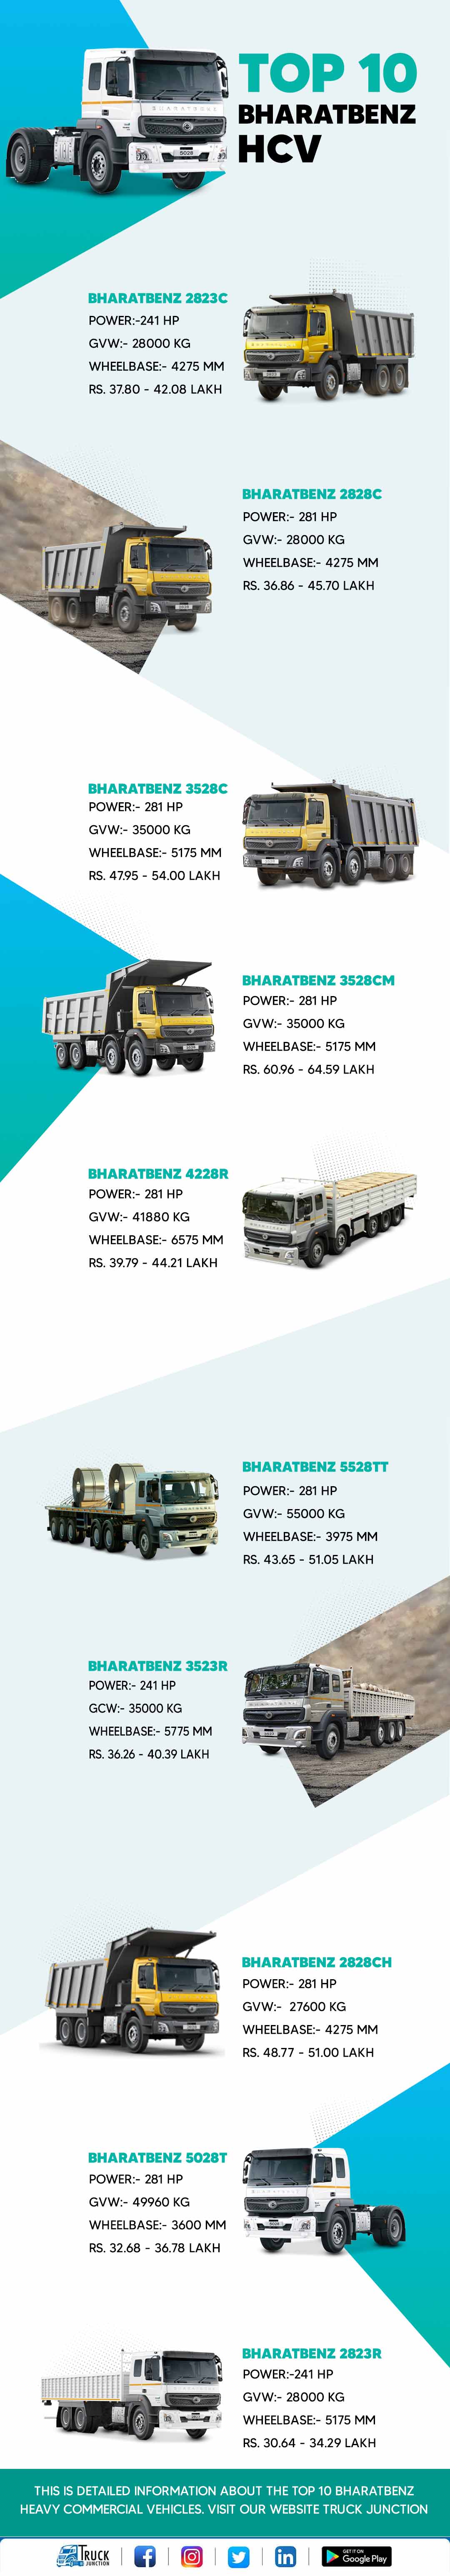 Top 10 BharatBenz Heavy Commercial Vehicles Infographic